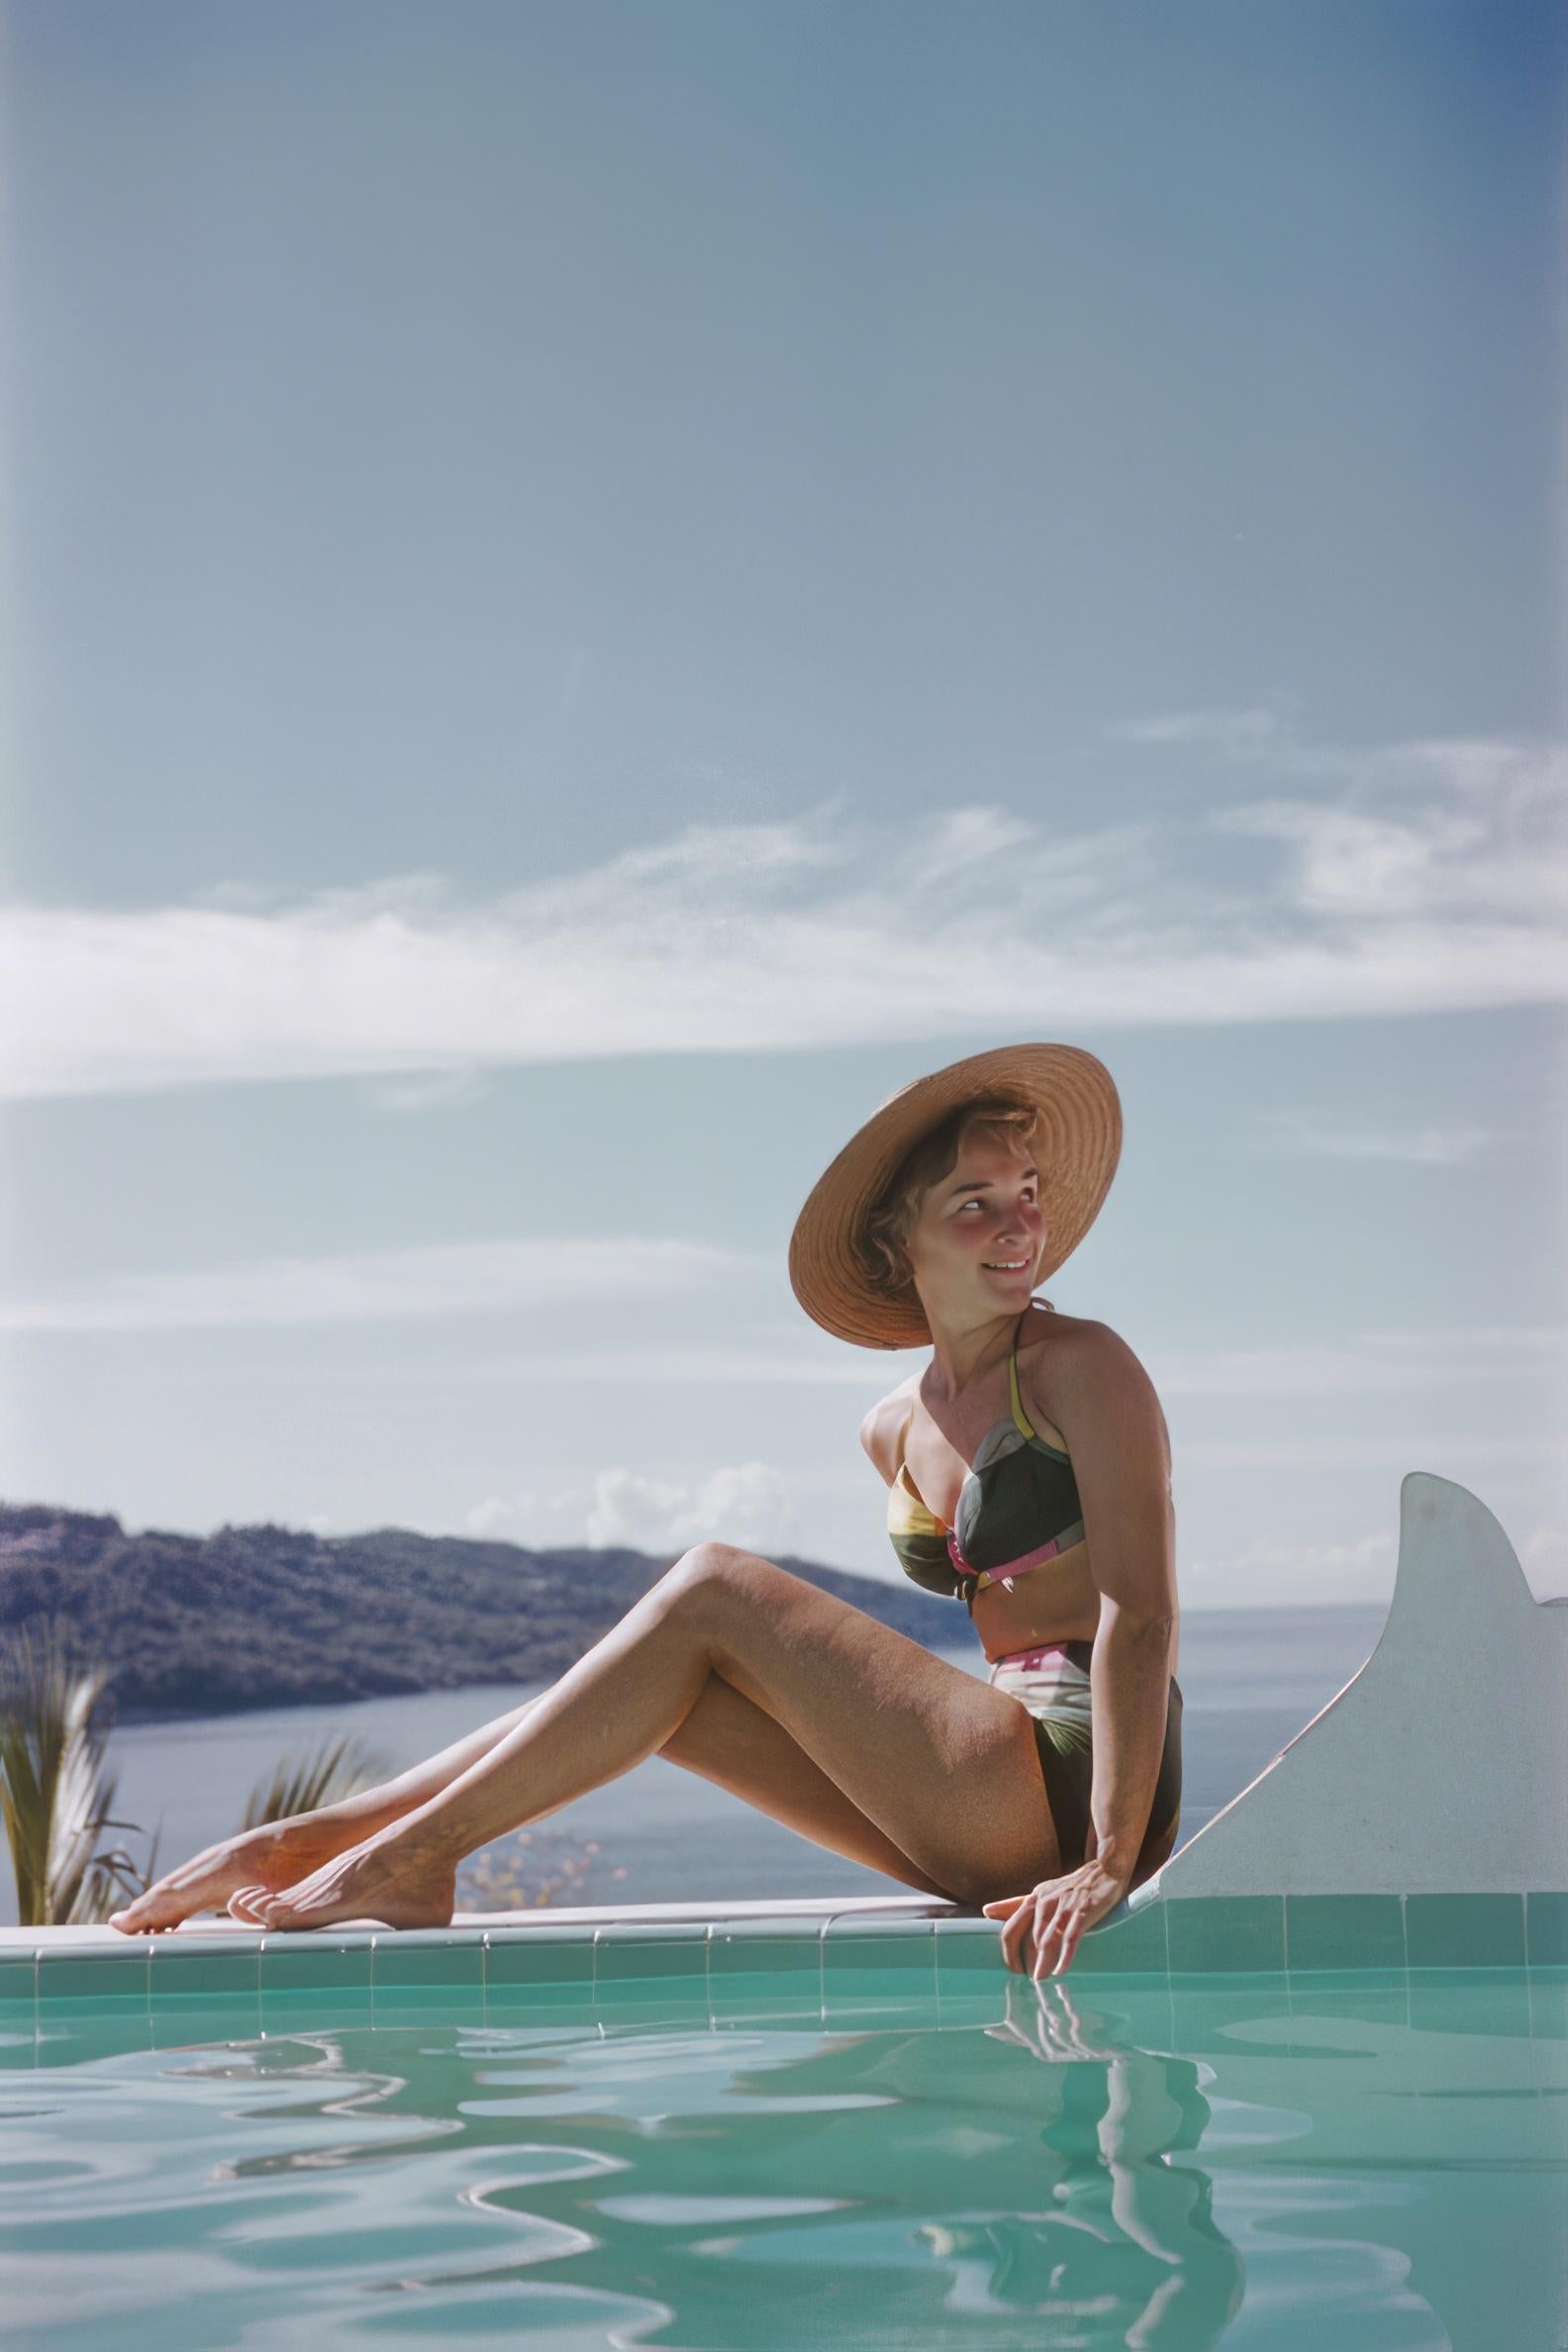 Slim Aarons
Ingrid in Acapulco
1961 (printed later)
C print
Estate stamped and hand numbered edition of 150 with certificate of authenticity from the estate.   

Ingrid Morath sunbathes by a swimming pool next to the sea in Acapulco, January 1961.